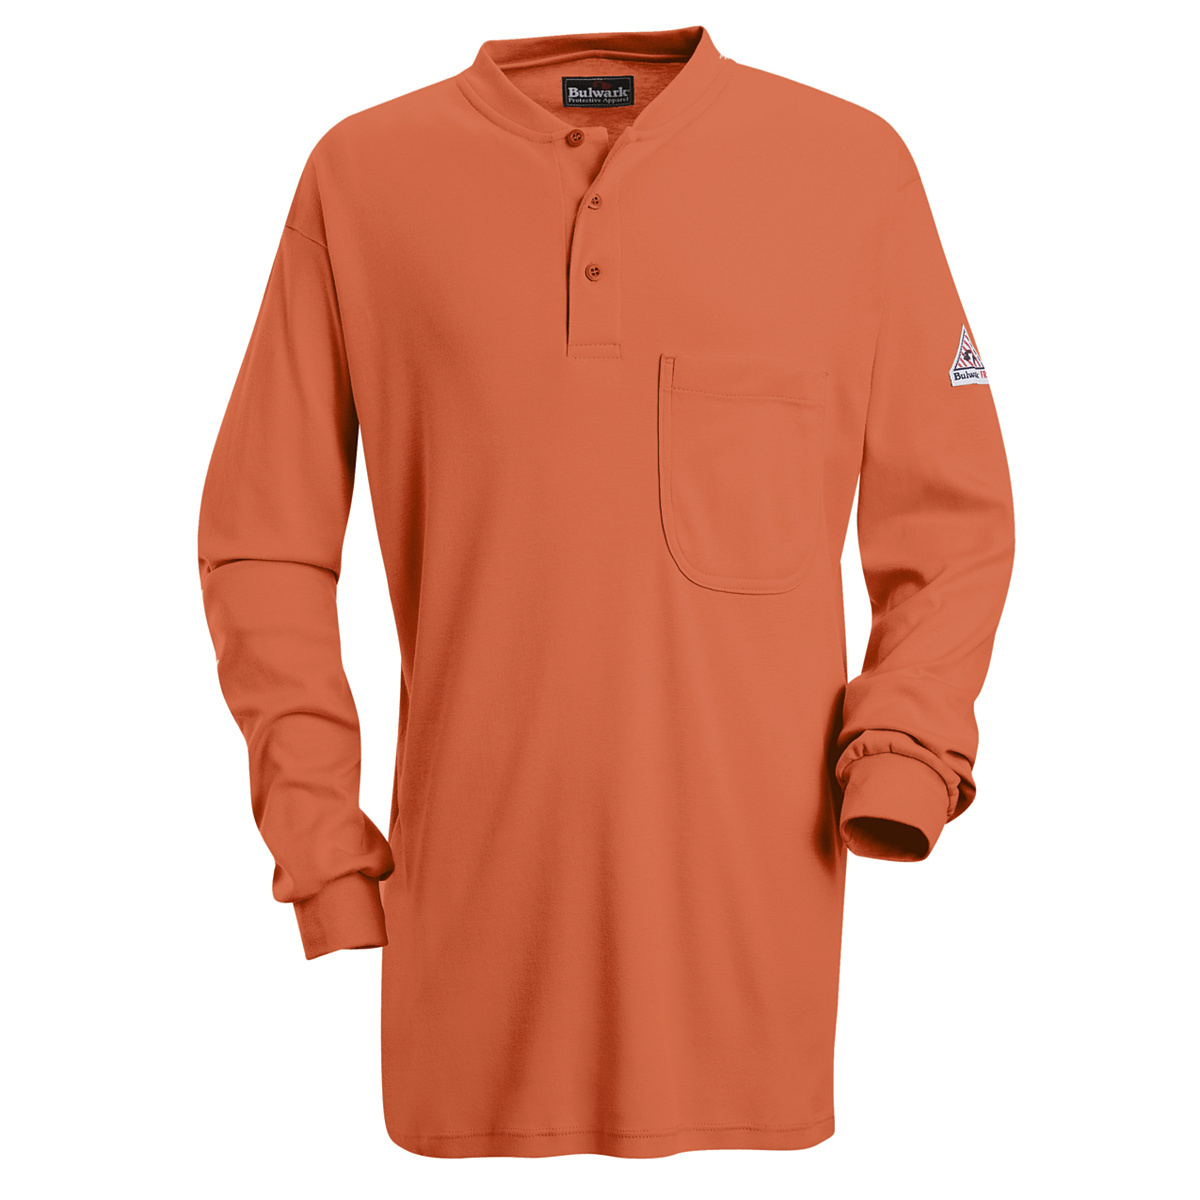 Bulwark® Large Tall Orange EXCEL FR® Interlock FR Cotton Flame Resistant Henley Shirt With Button Front Closure